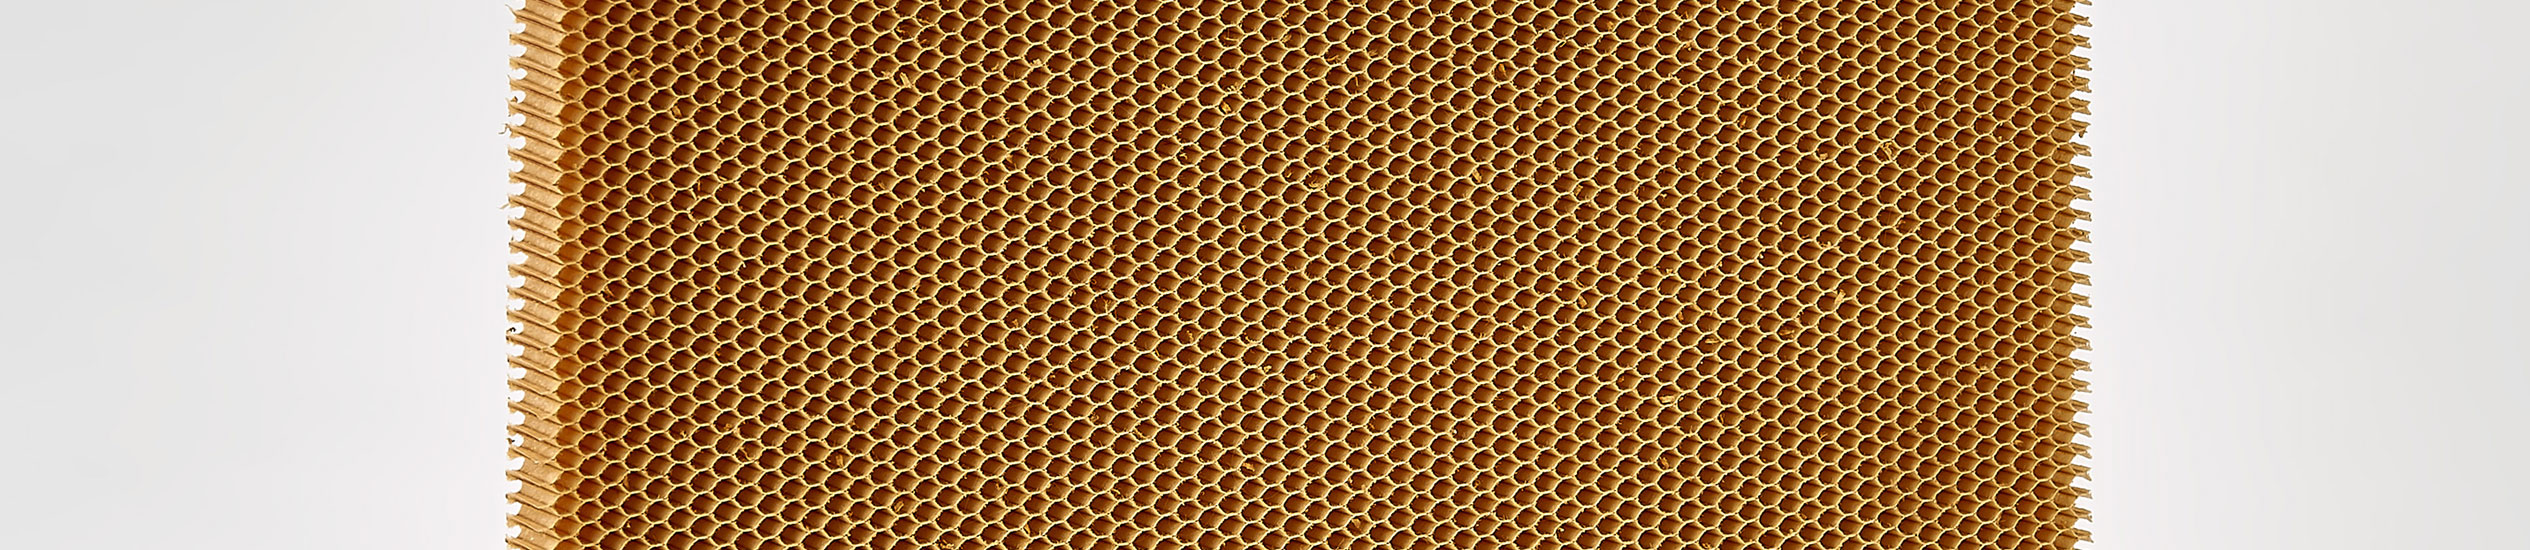 Nomex® honeycomb is an extremely lightweight,high strength,non metallic product manufactured with aramid fiber paper impregnated with a heat resistant phenolic